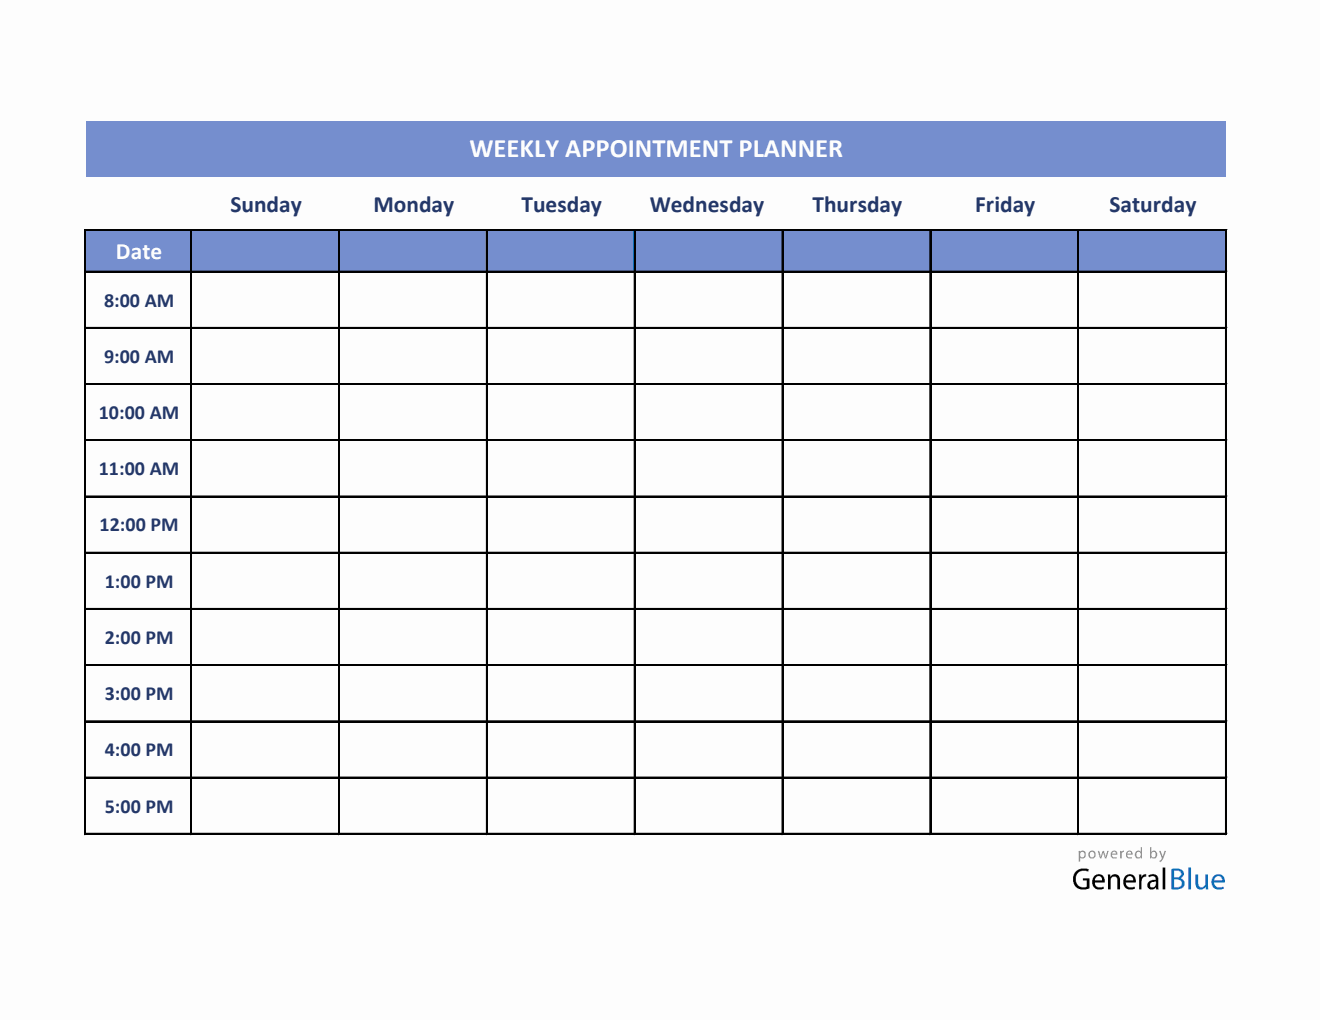 Weekly Appointment Planner in Excel (Blue)